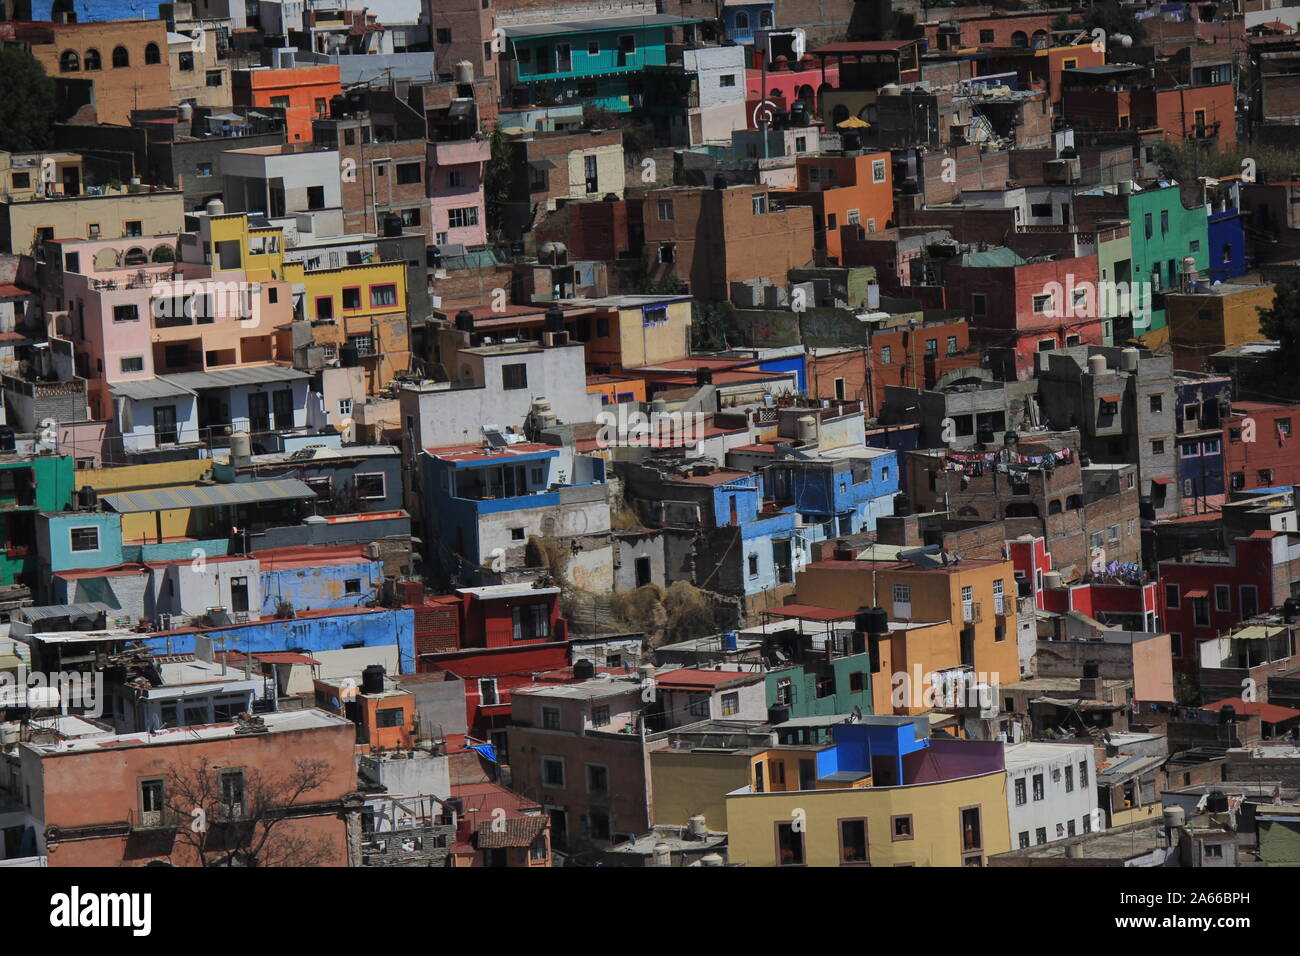 view of colorful houses on hill in Guanajuato, Mexico, located in Central Mexico Stock Photo